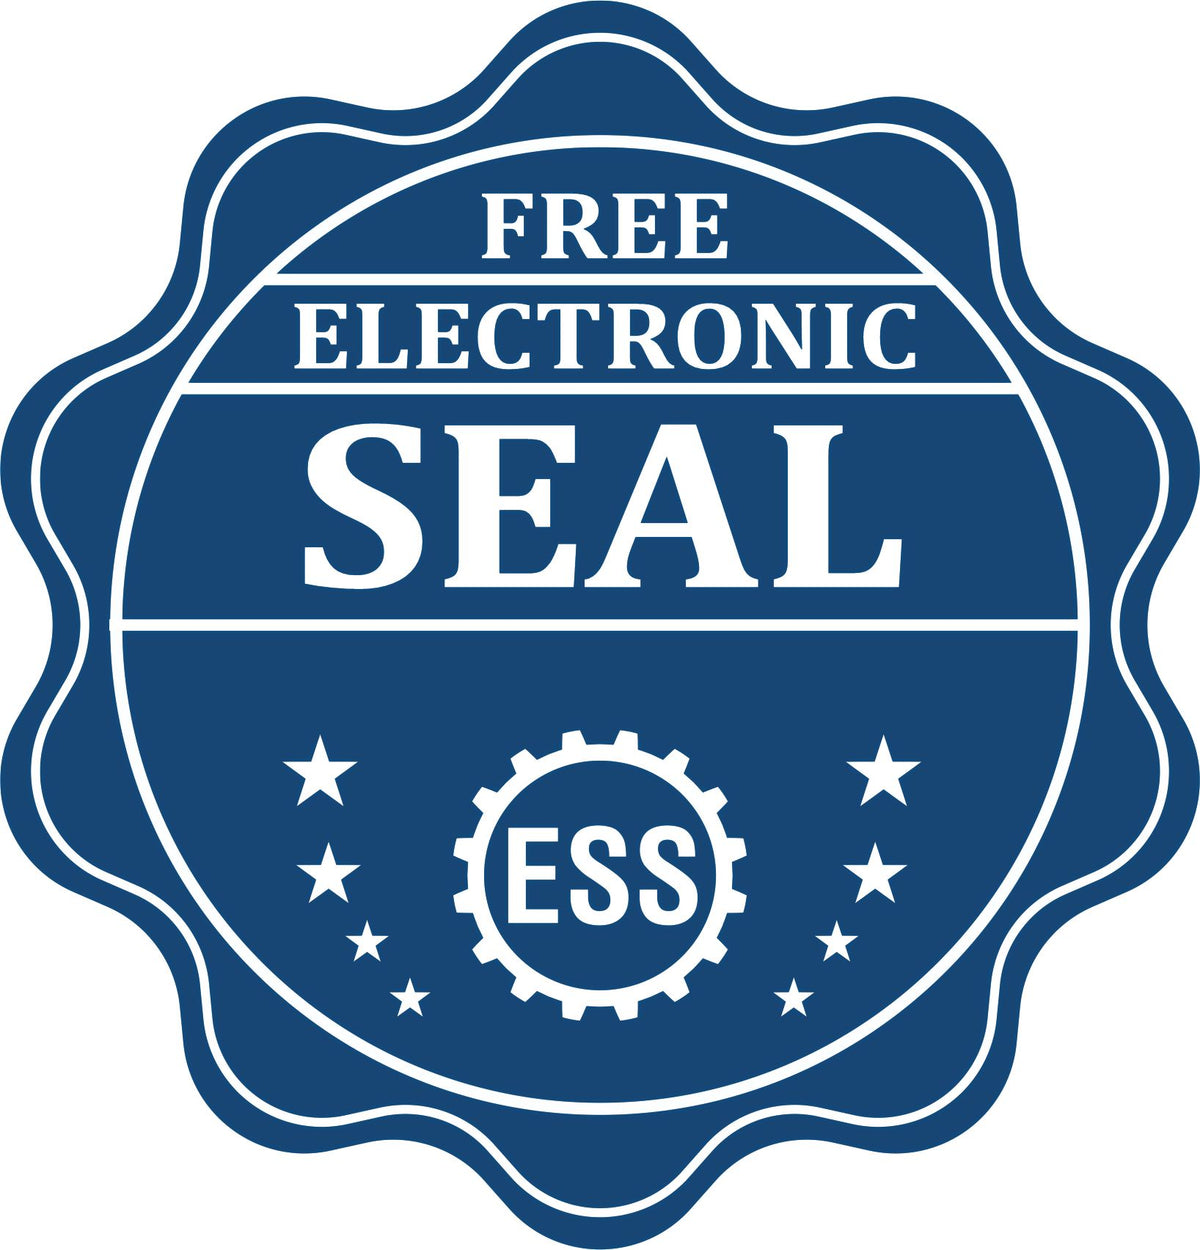 A badge showing a free electronic seal for the Maryland Desk Surveyor Seal Embosser with stars and the ESS gear on the emblem.